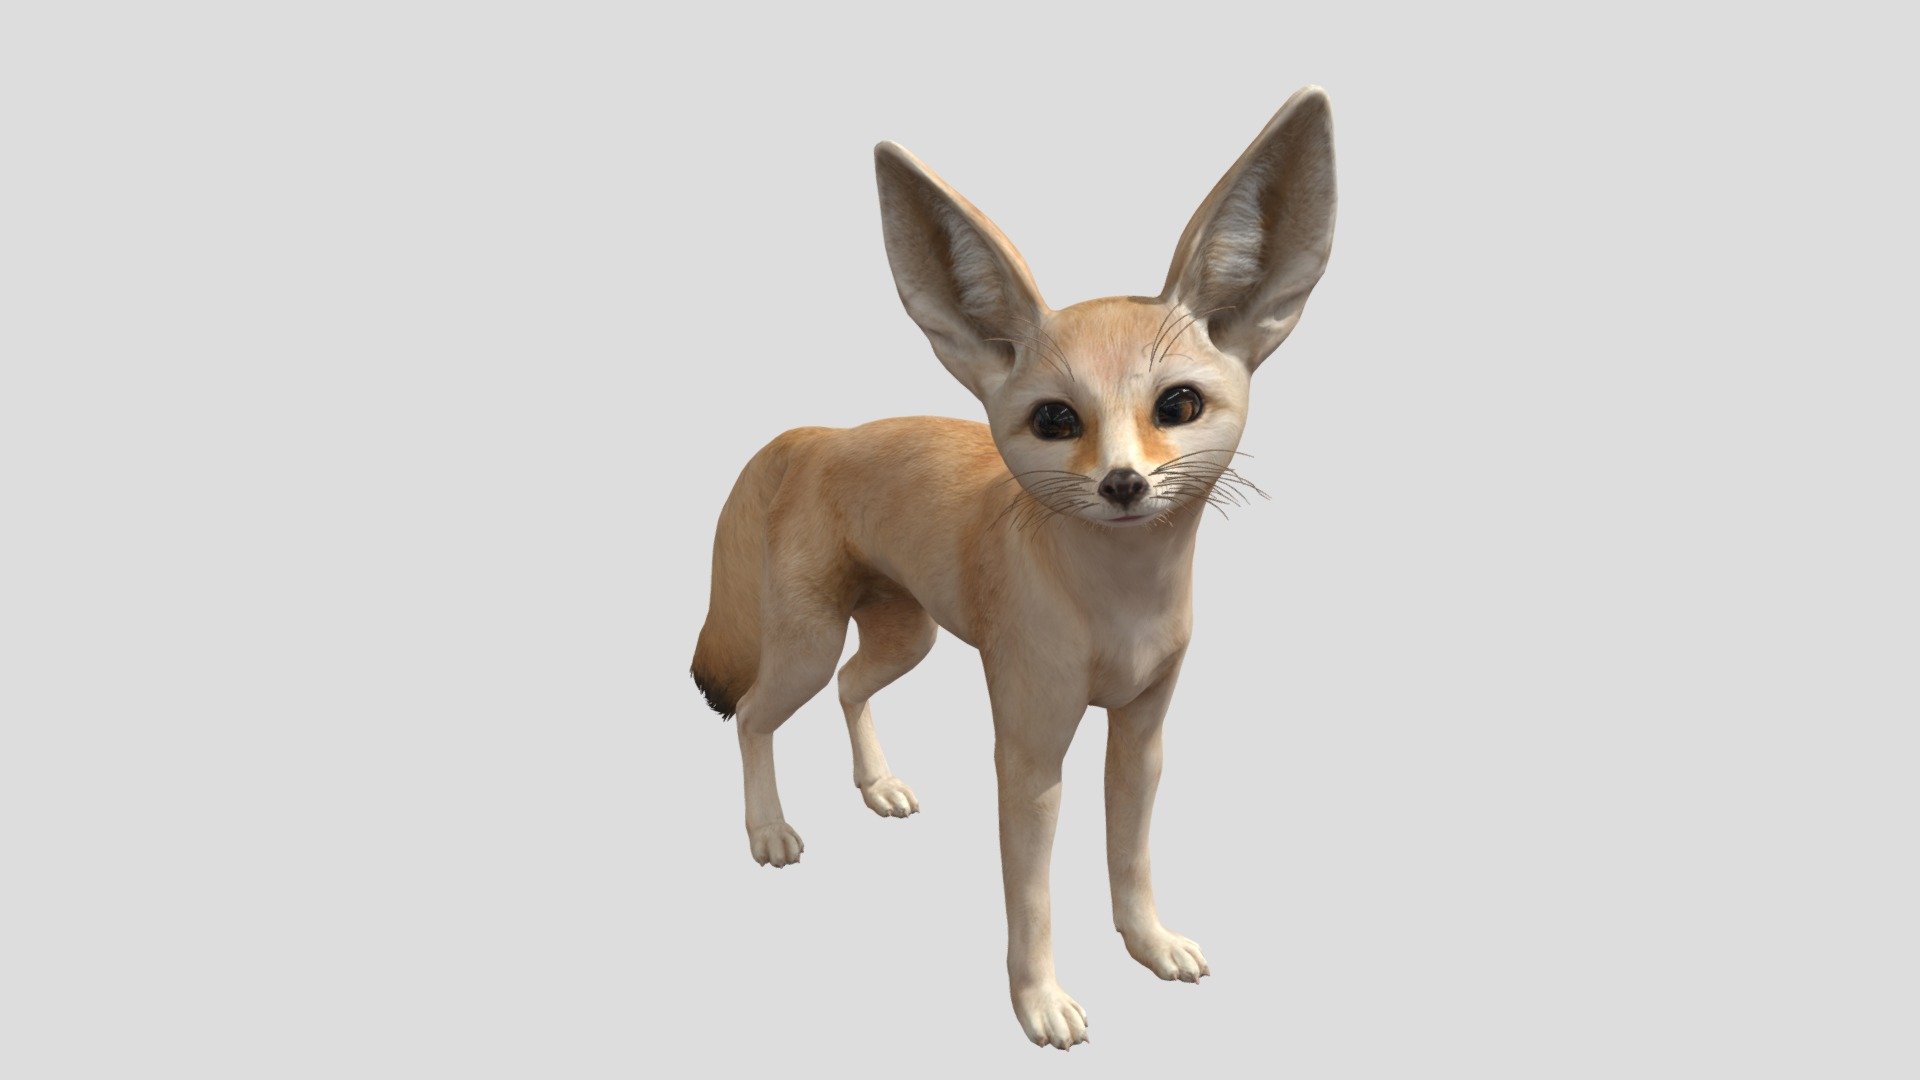 this animal is animated and it is really cute and spacemonkey said remove it so i added a link so that my model will not be deleted
https://sketchfab.com/3d-models/fox-non-commercial-3794fc0cb41941acafecf050c3e9e436 - fennec fox (animated and cute) - Download Free 3D model by dinomaster 3d model